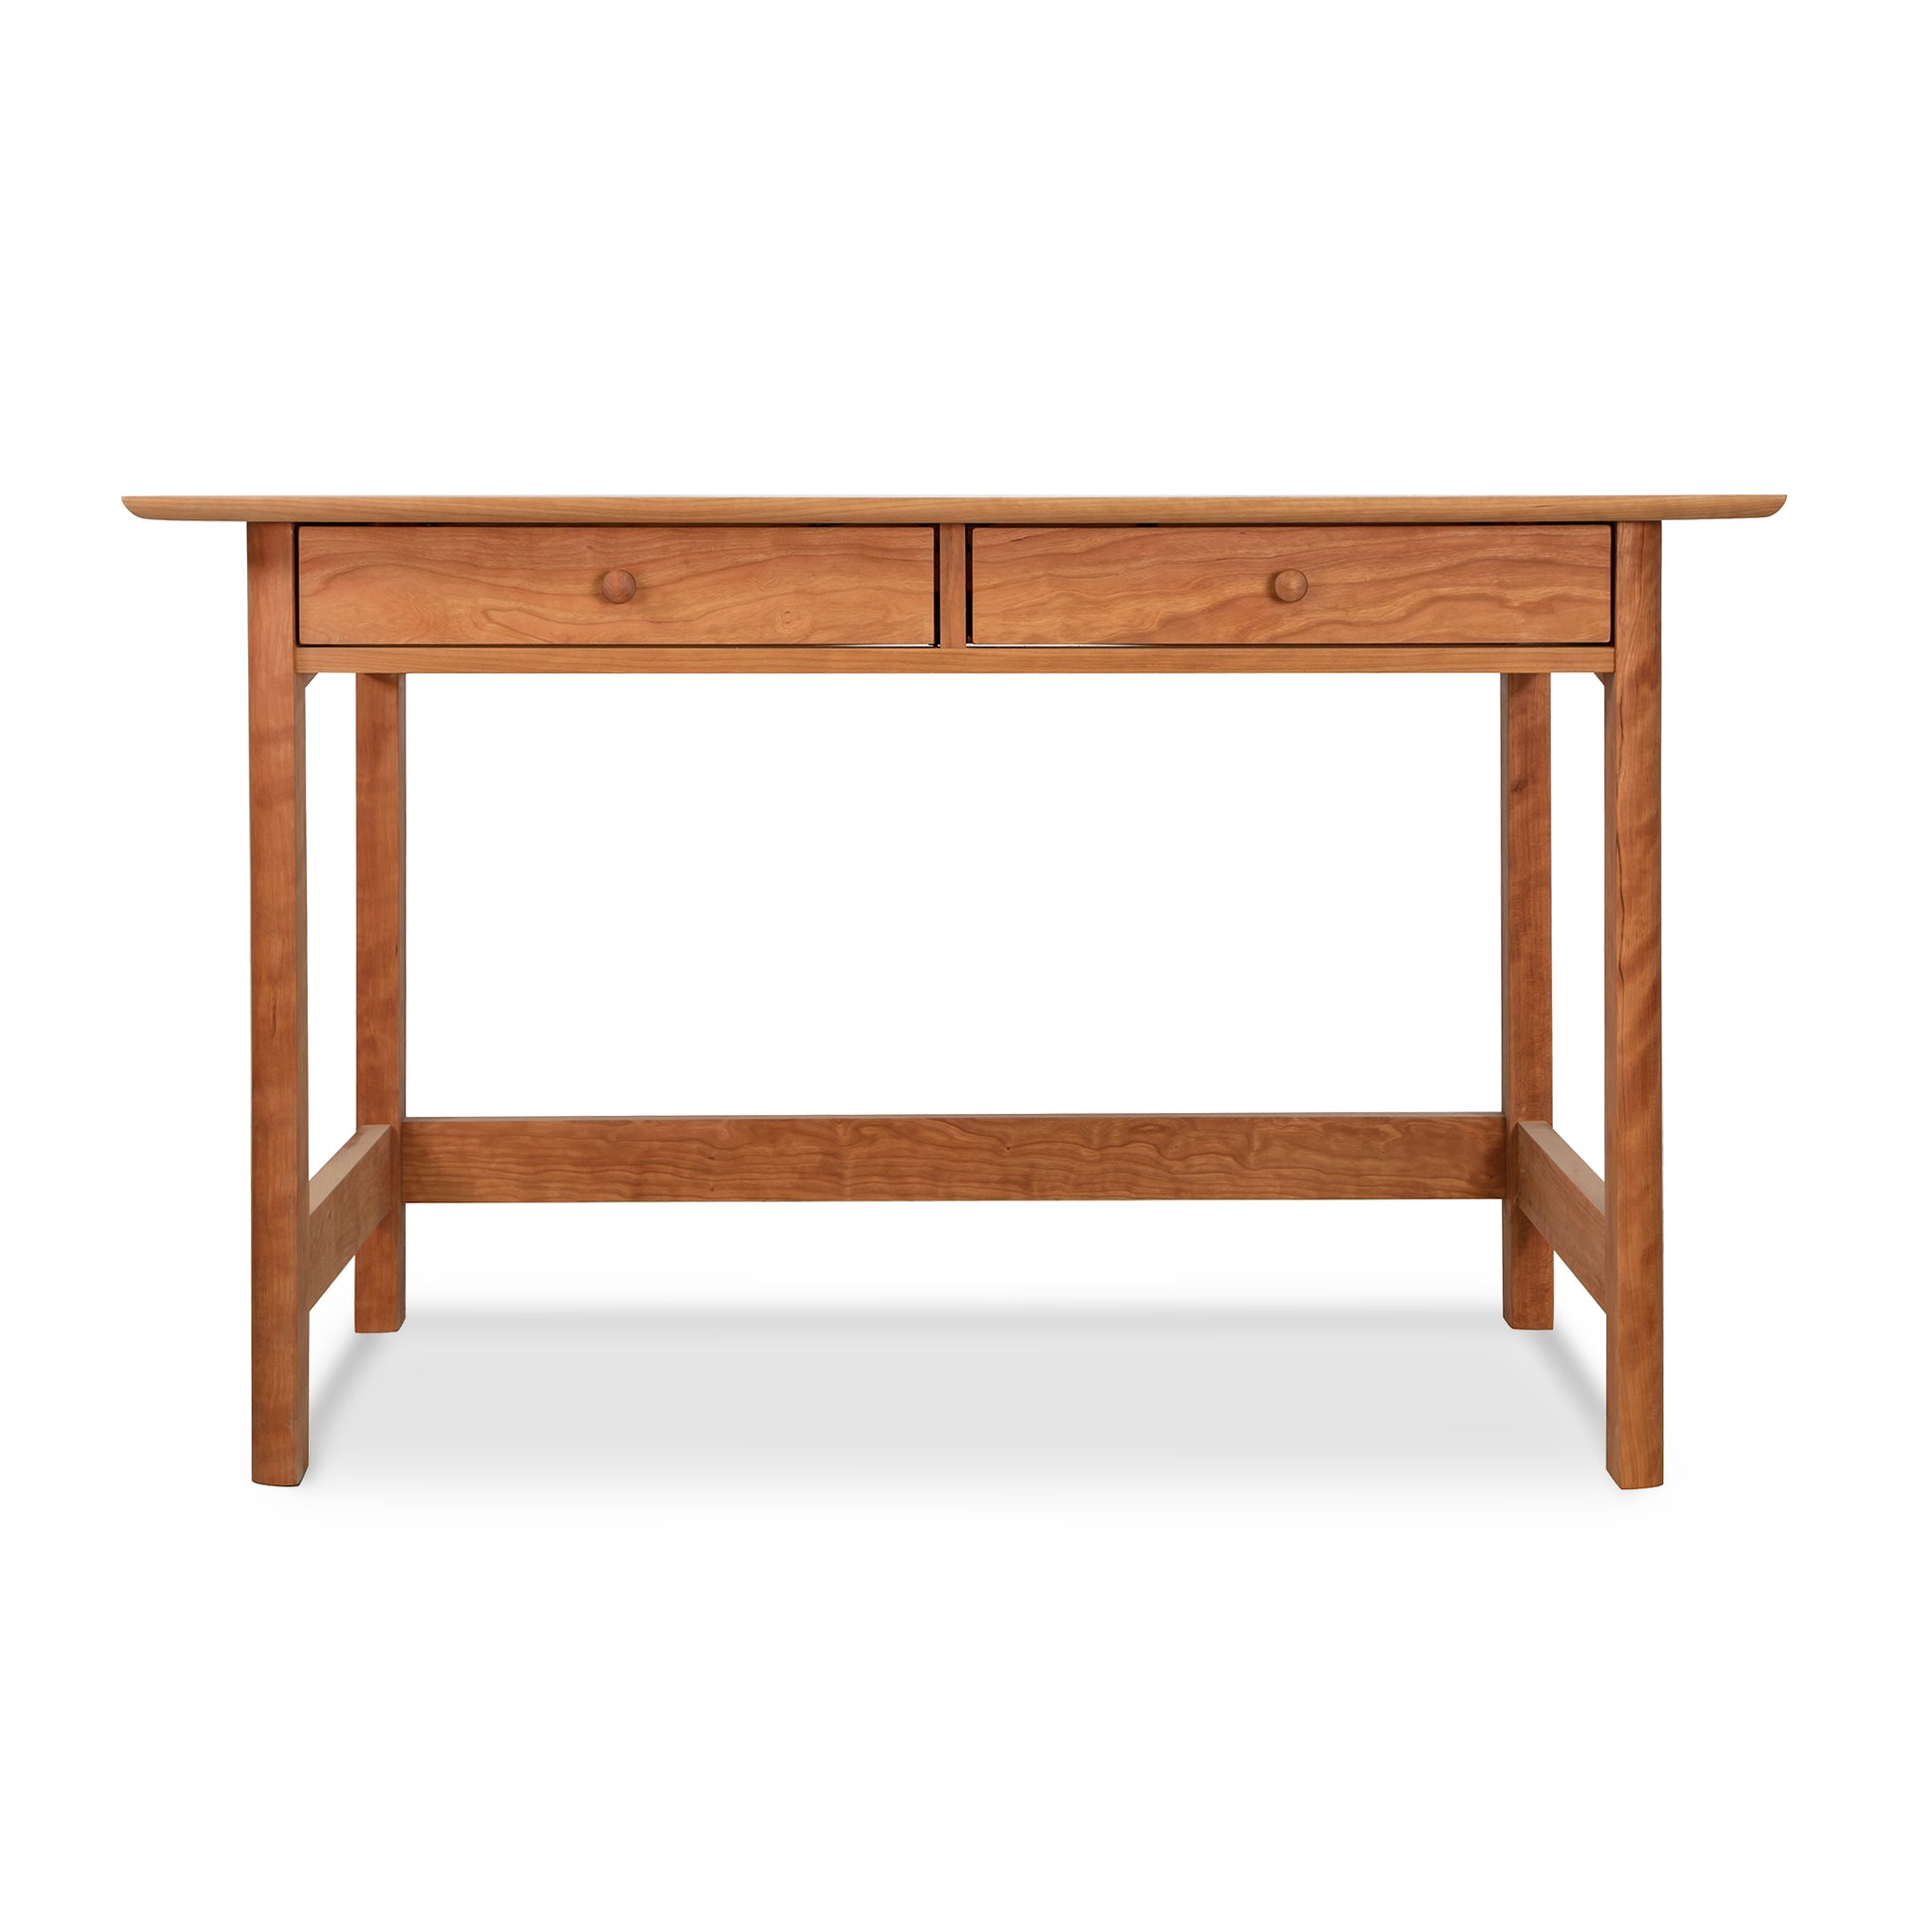 Vermont Furniture Designs Heartwood Shaker Writing Desk with two drawers against a white background.